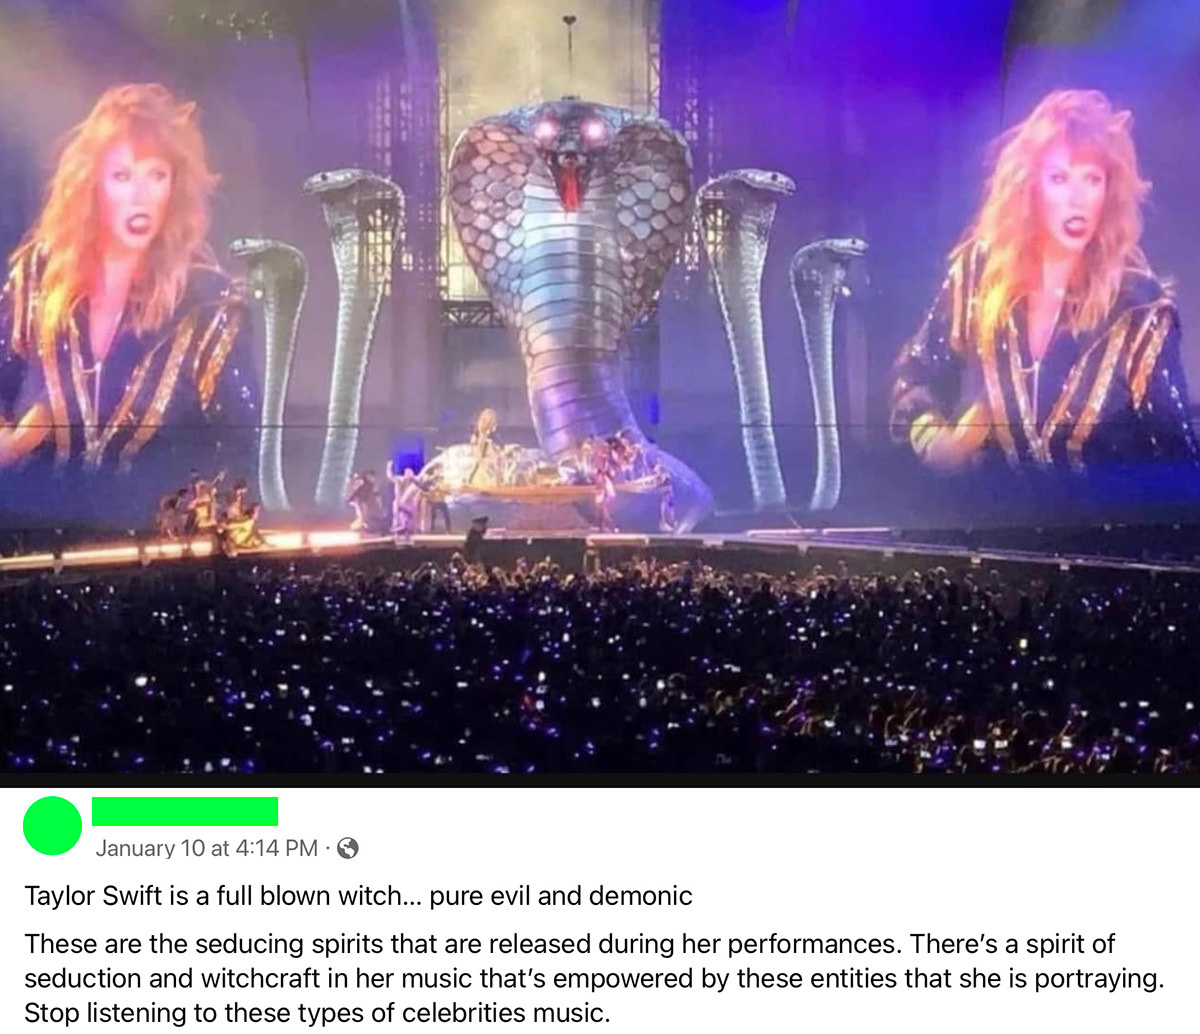 A post about Taylor Swift being a full blown witch that's pure evil and demonic.